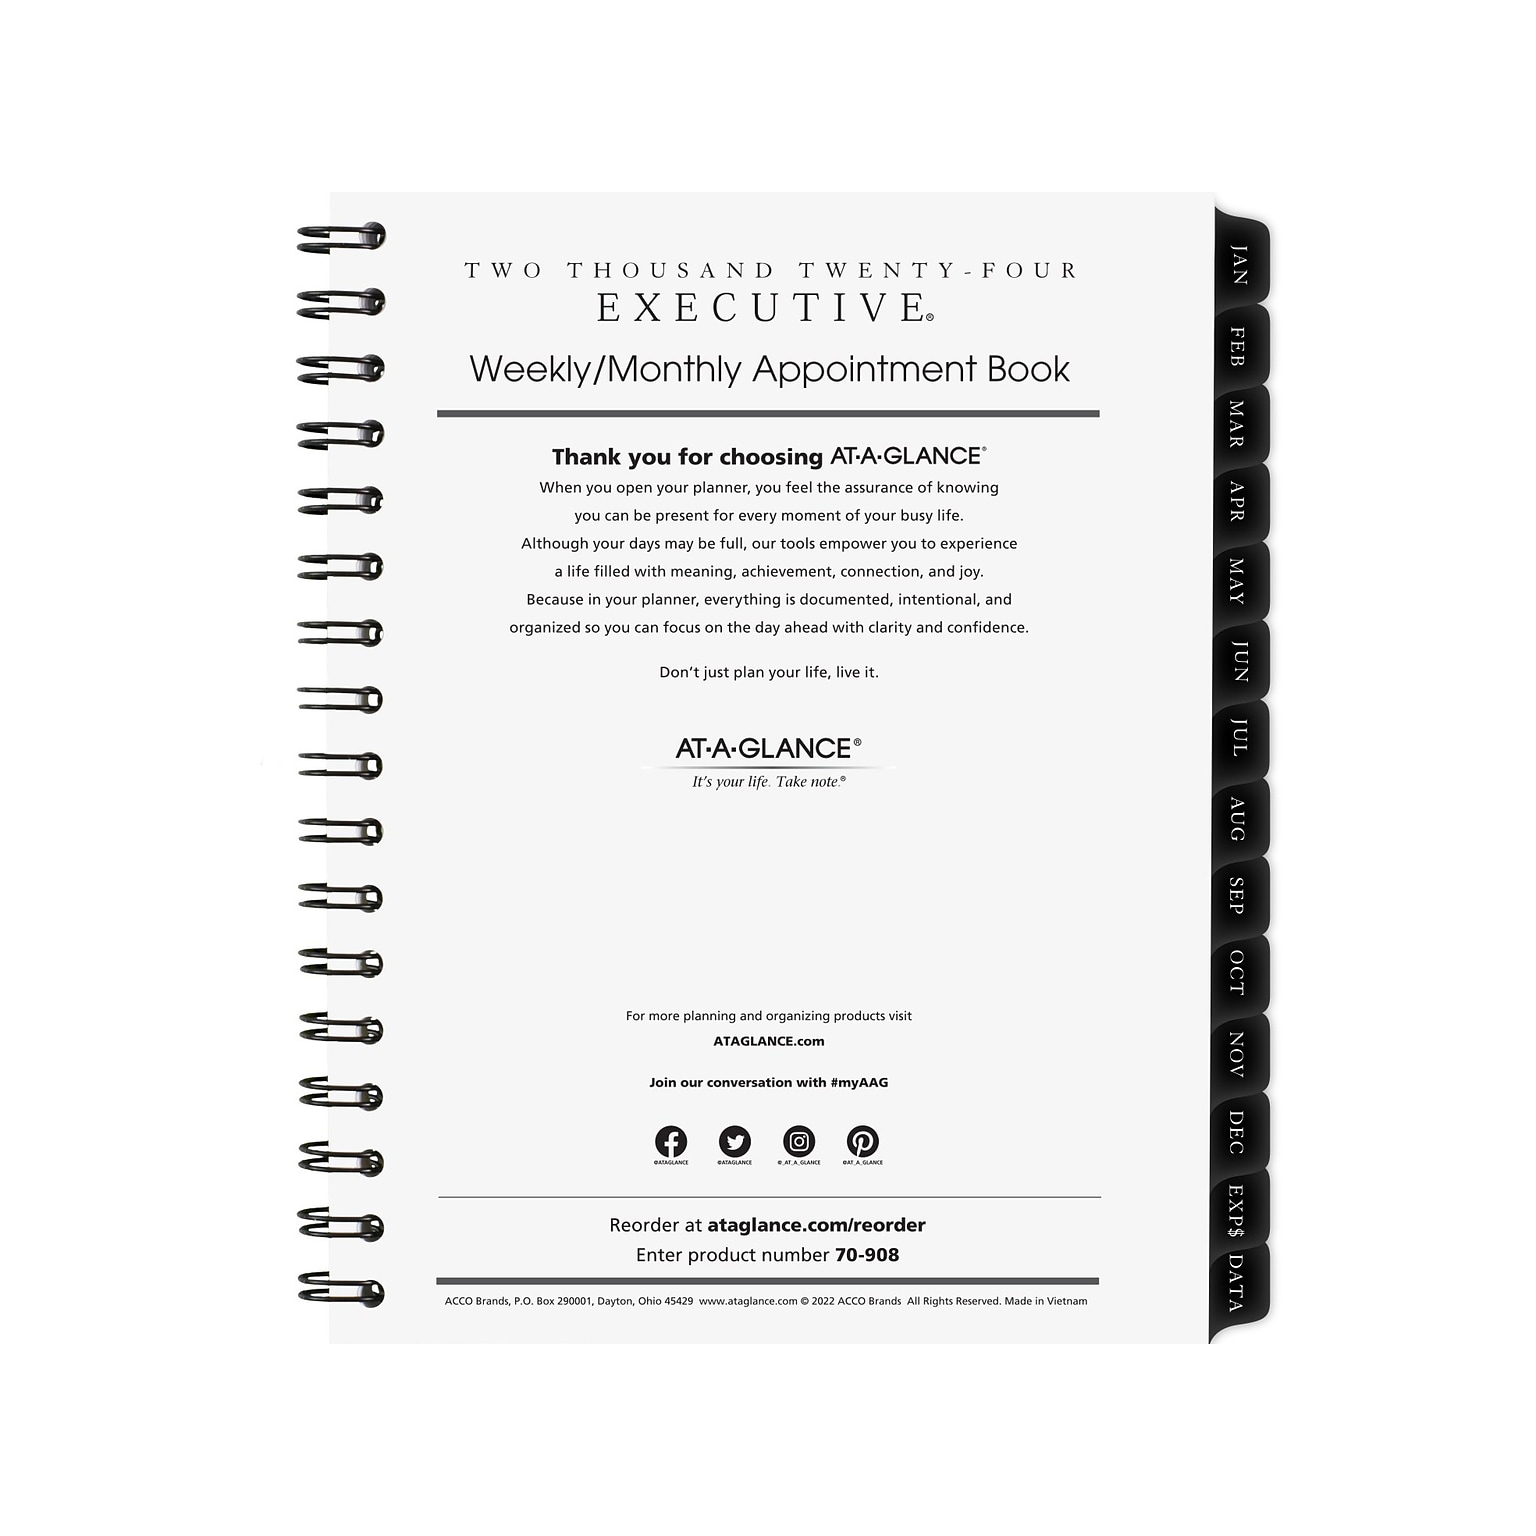 AT-A-GLANCE Executive 8.75 x 6.5 Weekly & Monthly Appointment Book Refill, White/Black (70-908-10-24)